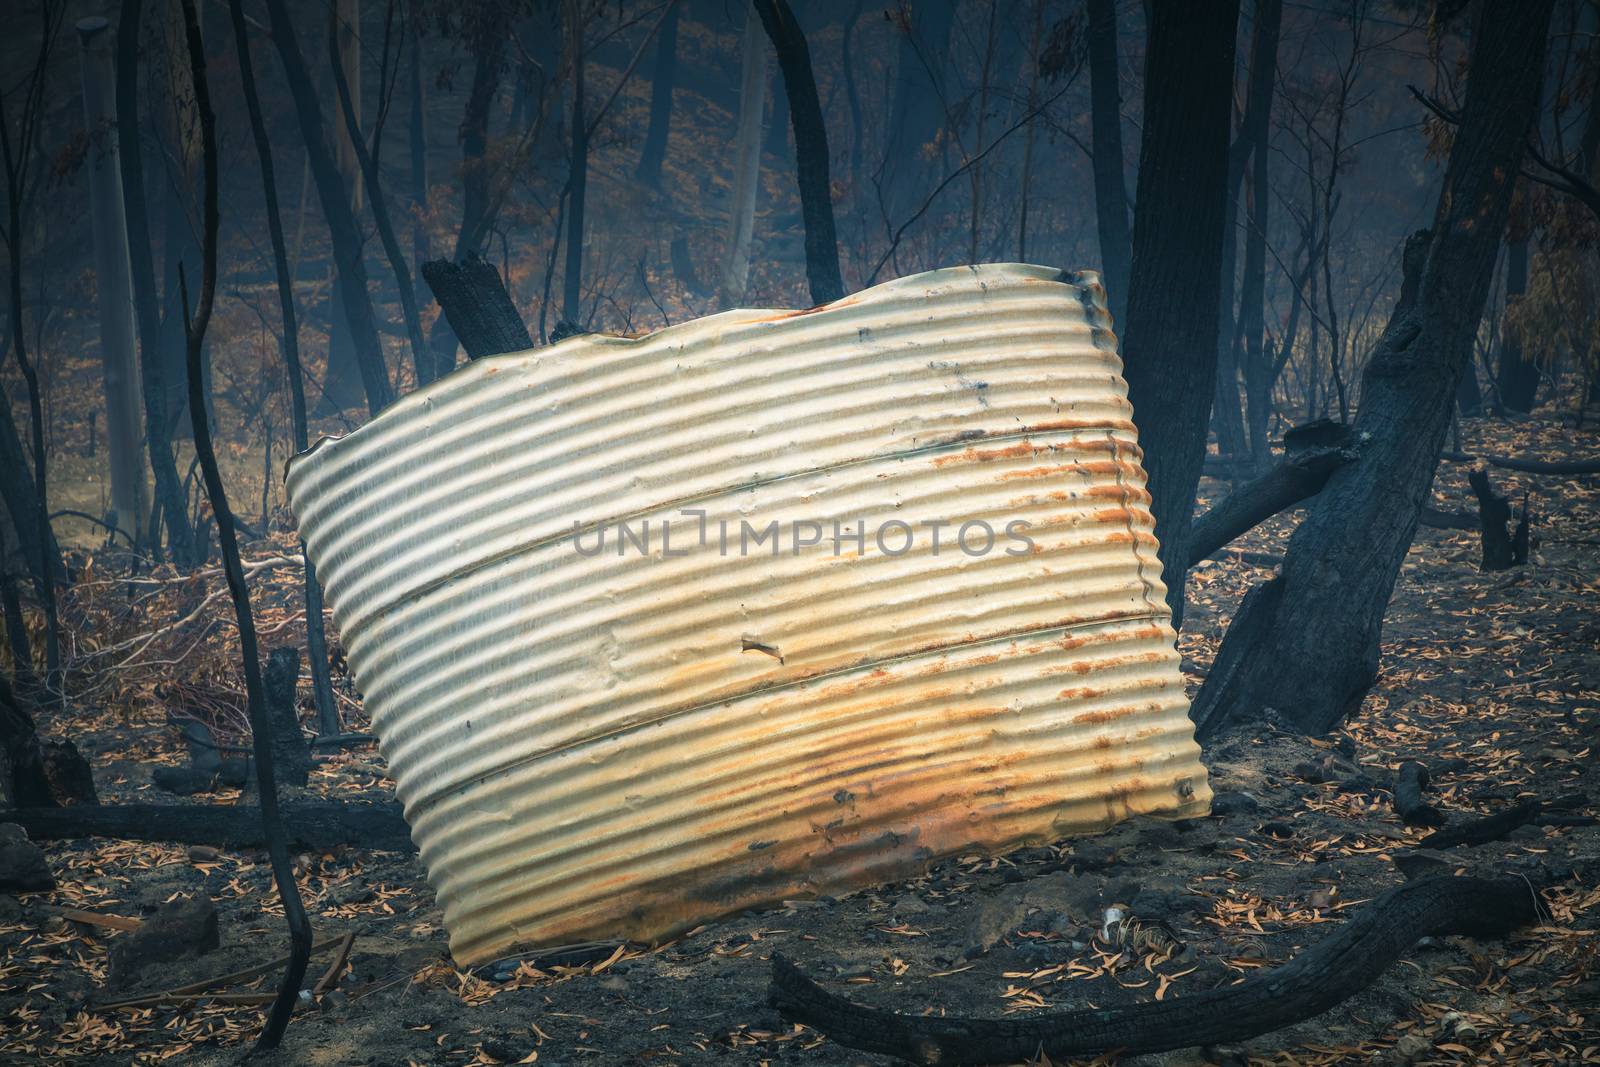 A water tank and gum trees burnt by severe bushfire in The Blue Mountains in Australia by WittkePhotos